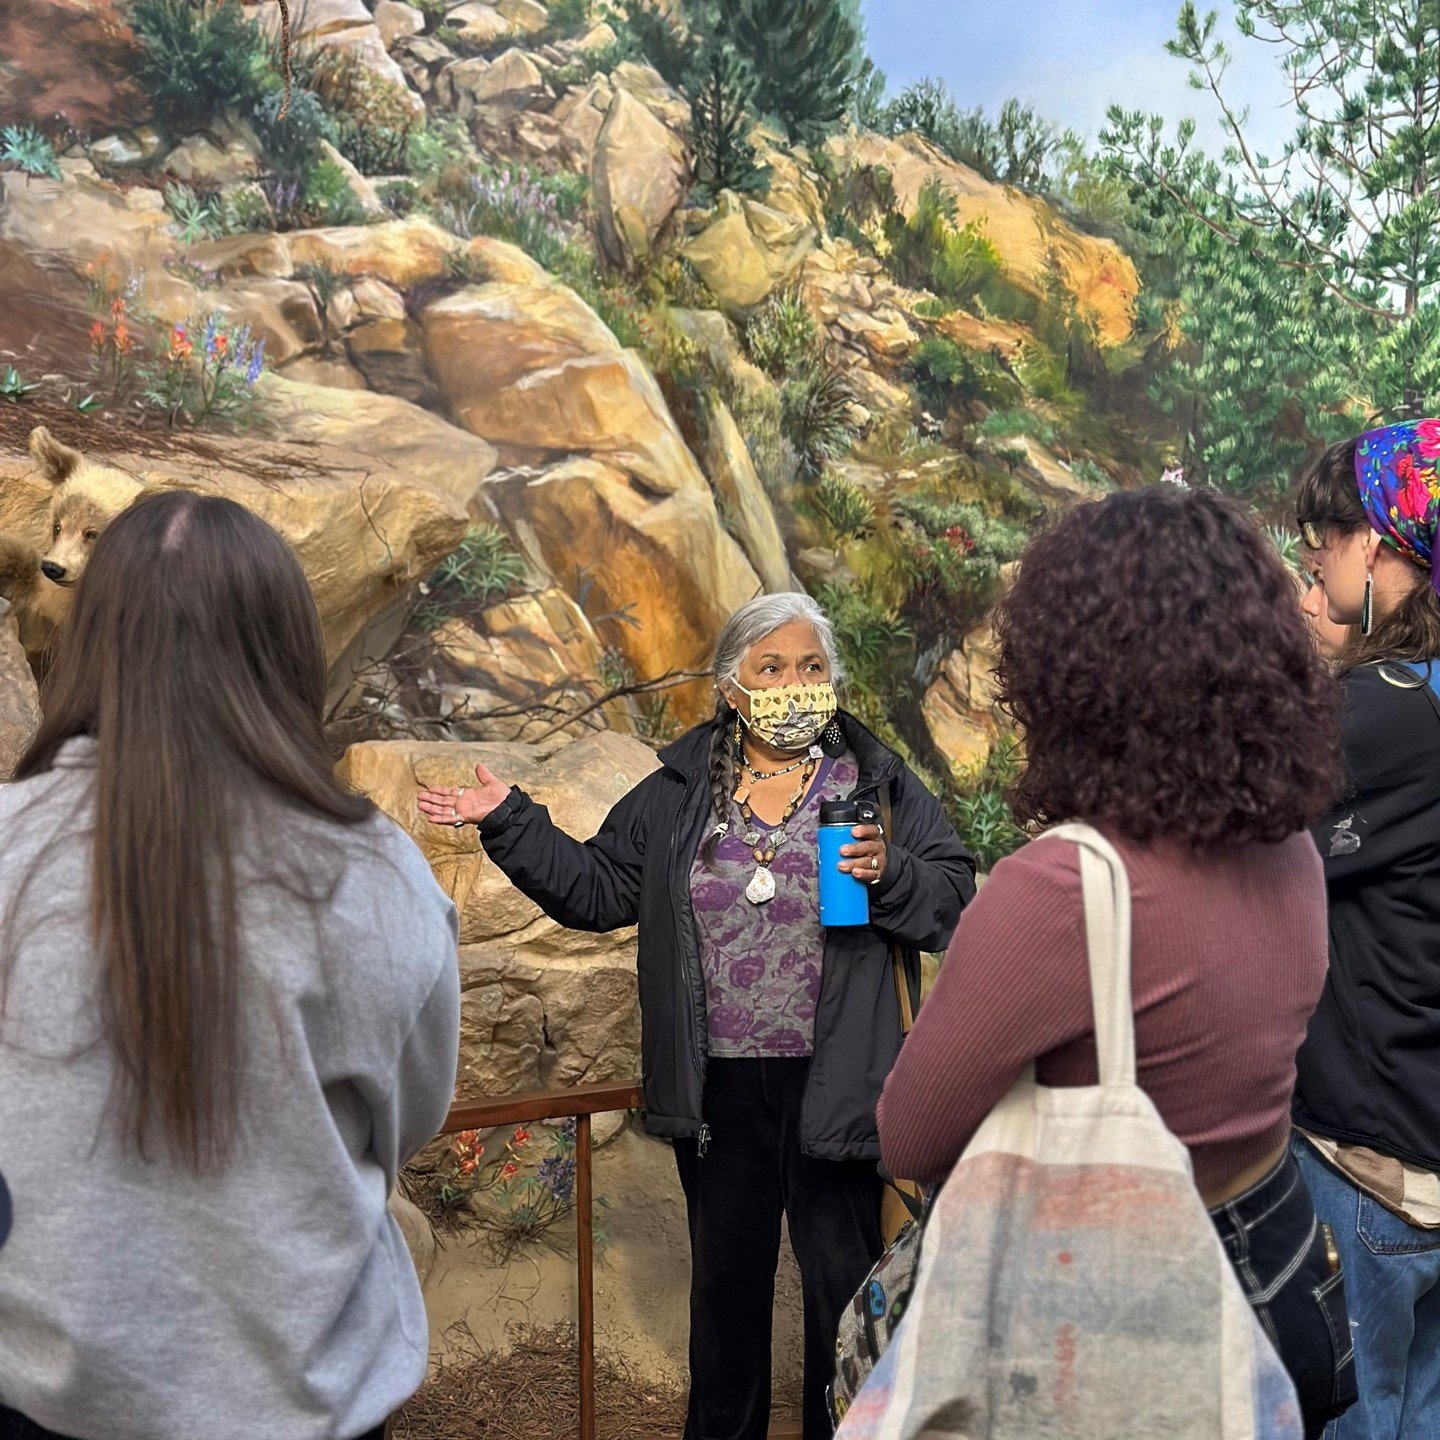 Chumash Elder, educator, and cultural resource consultant Julie Tumamait-Stenslie hosted week 3 of the Pax Environmental Science Institute (PESI). The students were joined by two community members (Ojai City Council member Liz Campos, and Chumash act